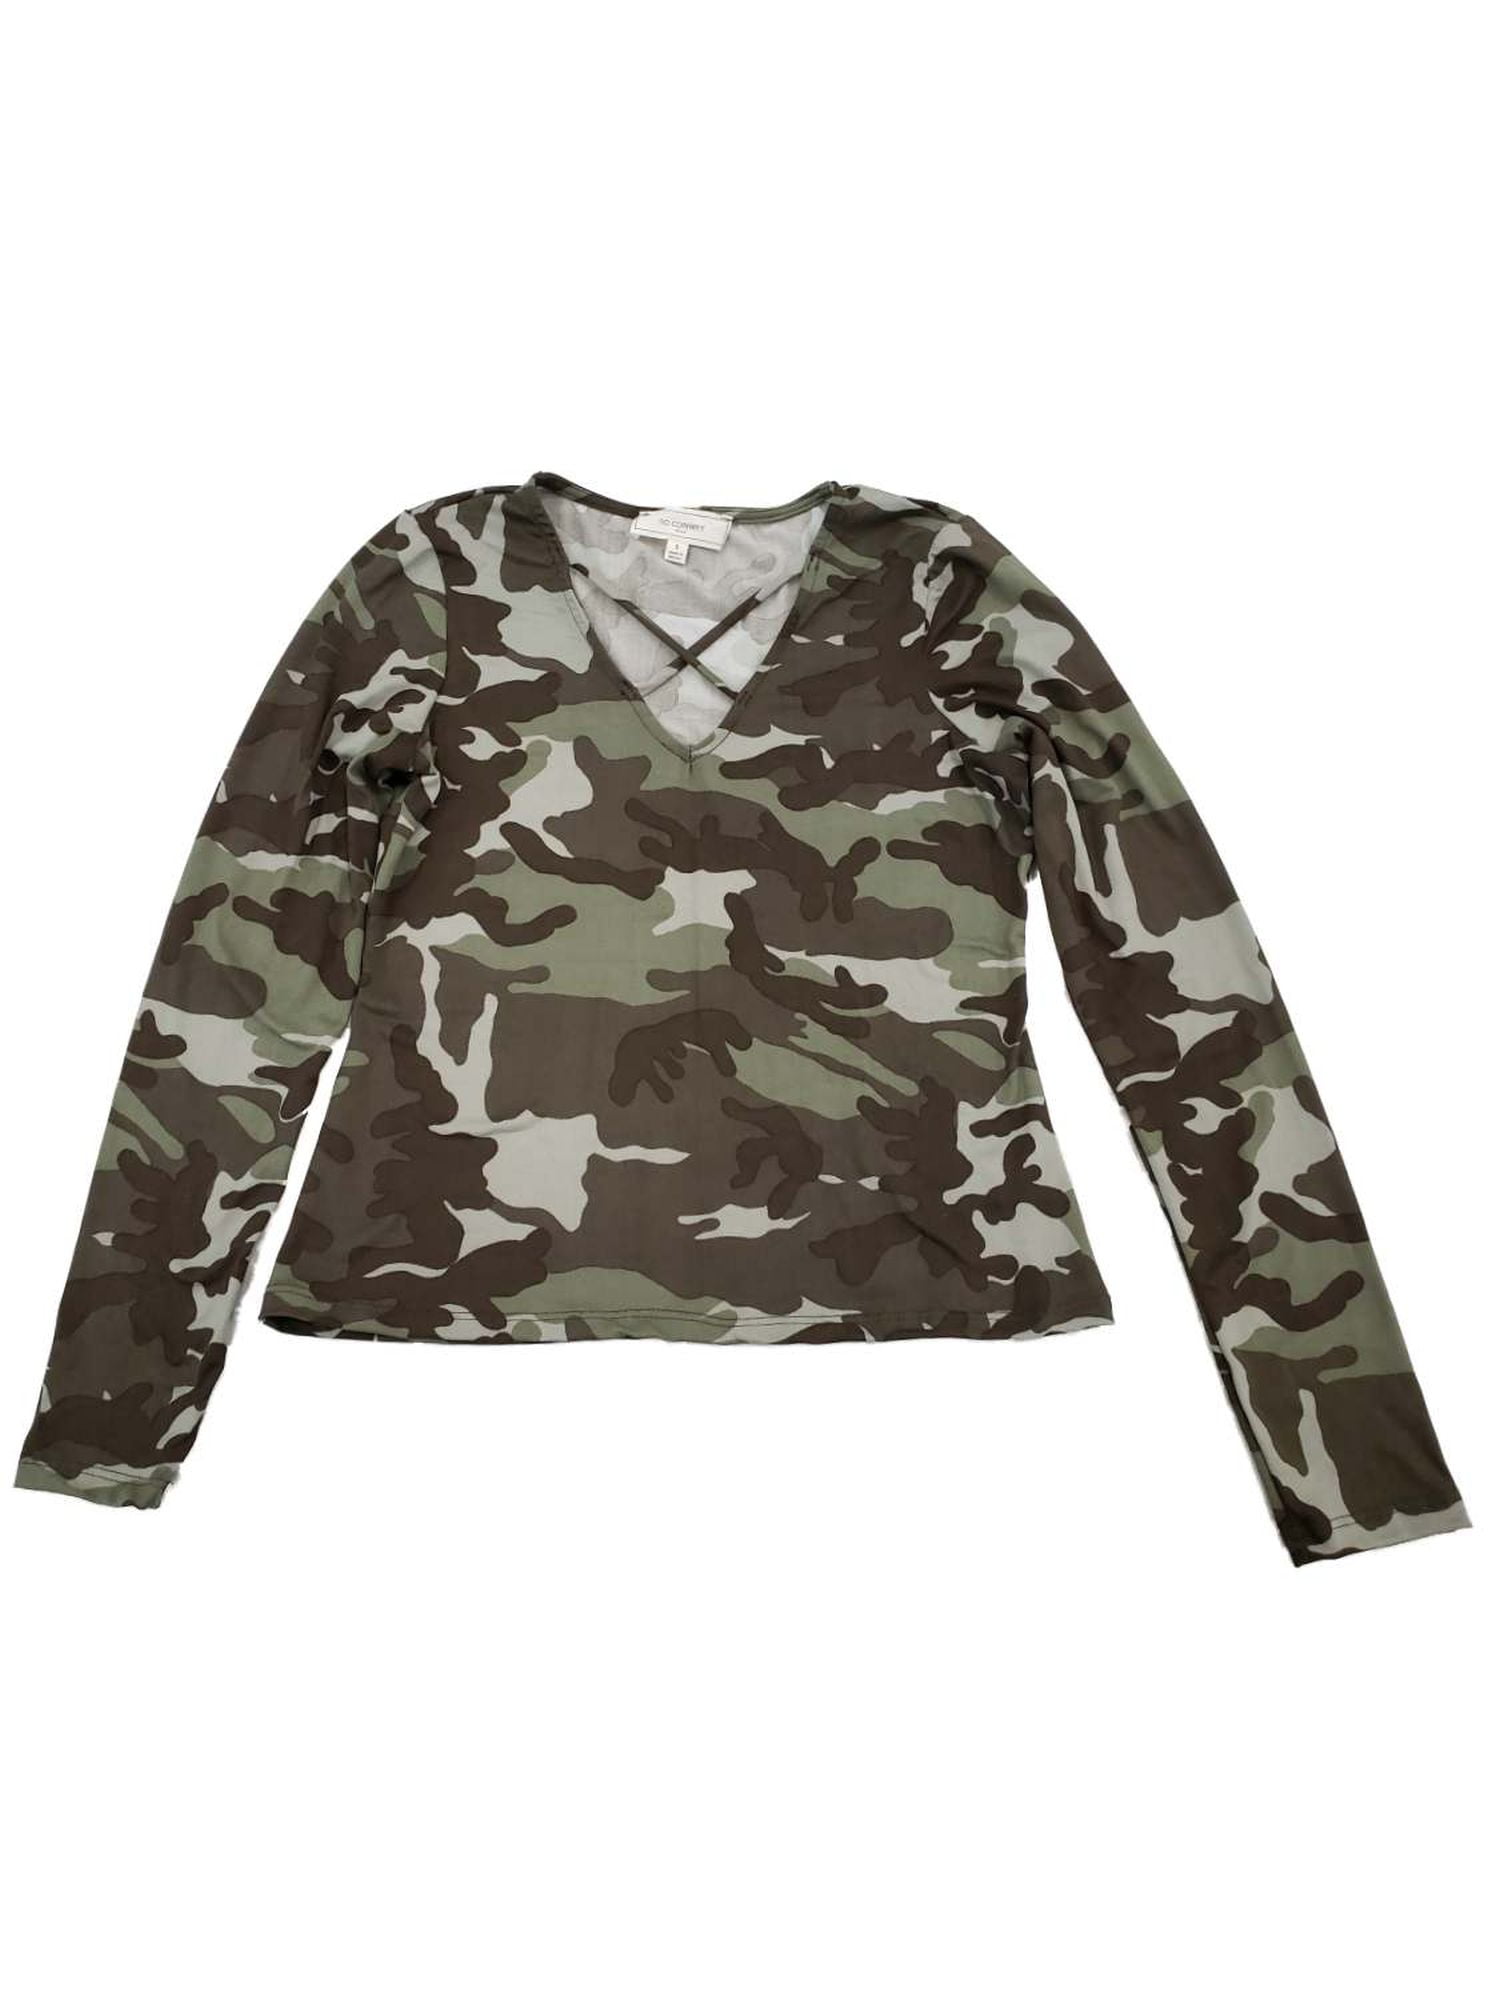 MILITARY SUMMER T-SHIRT CAMOUFLAGE TOP BLOUSE WOMENS LADIES OVERSIZE GREEN 